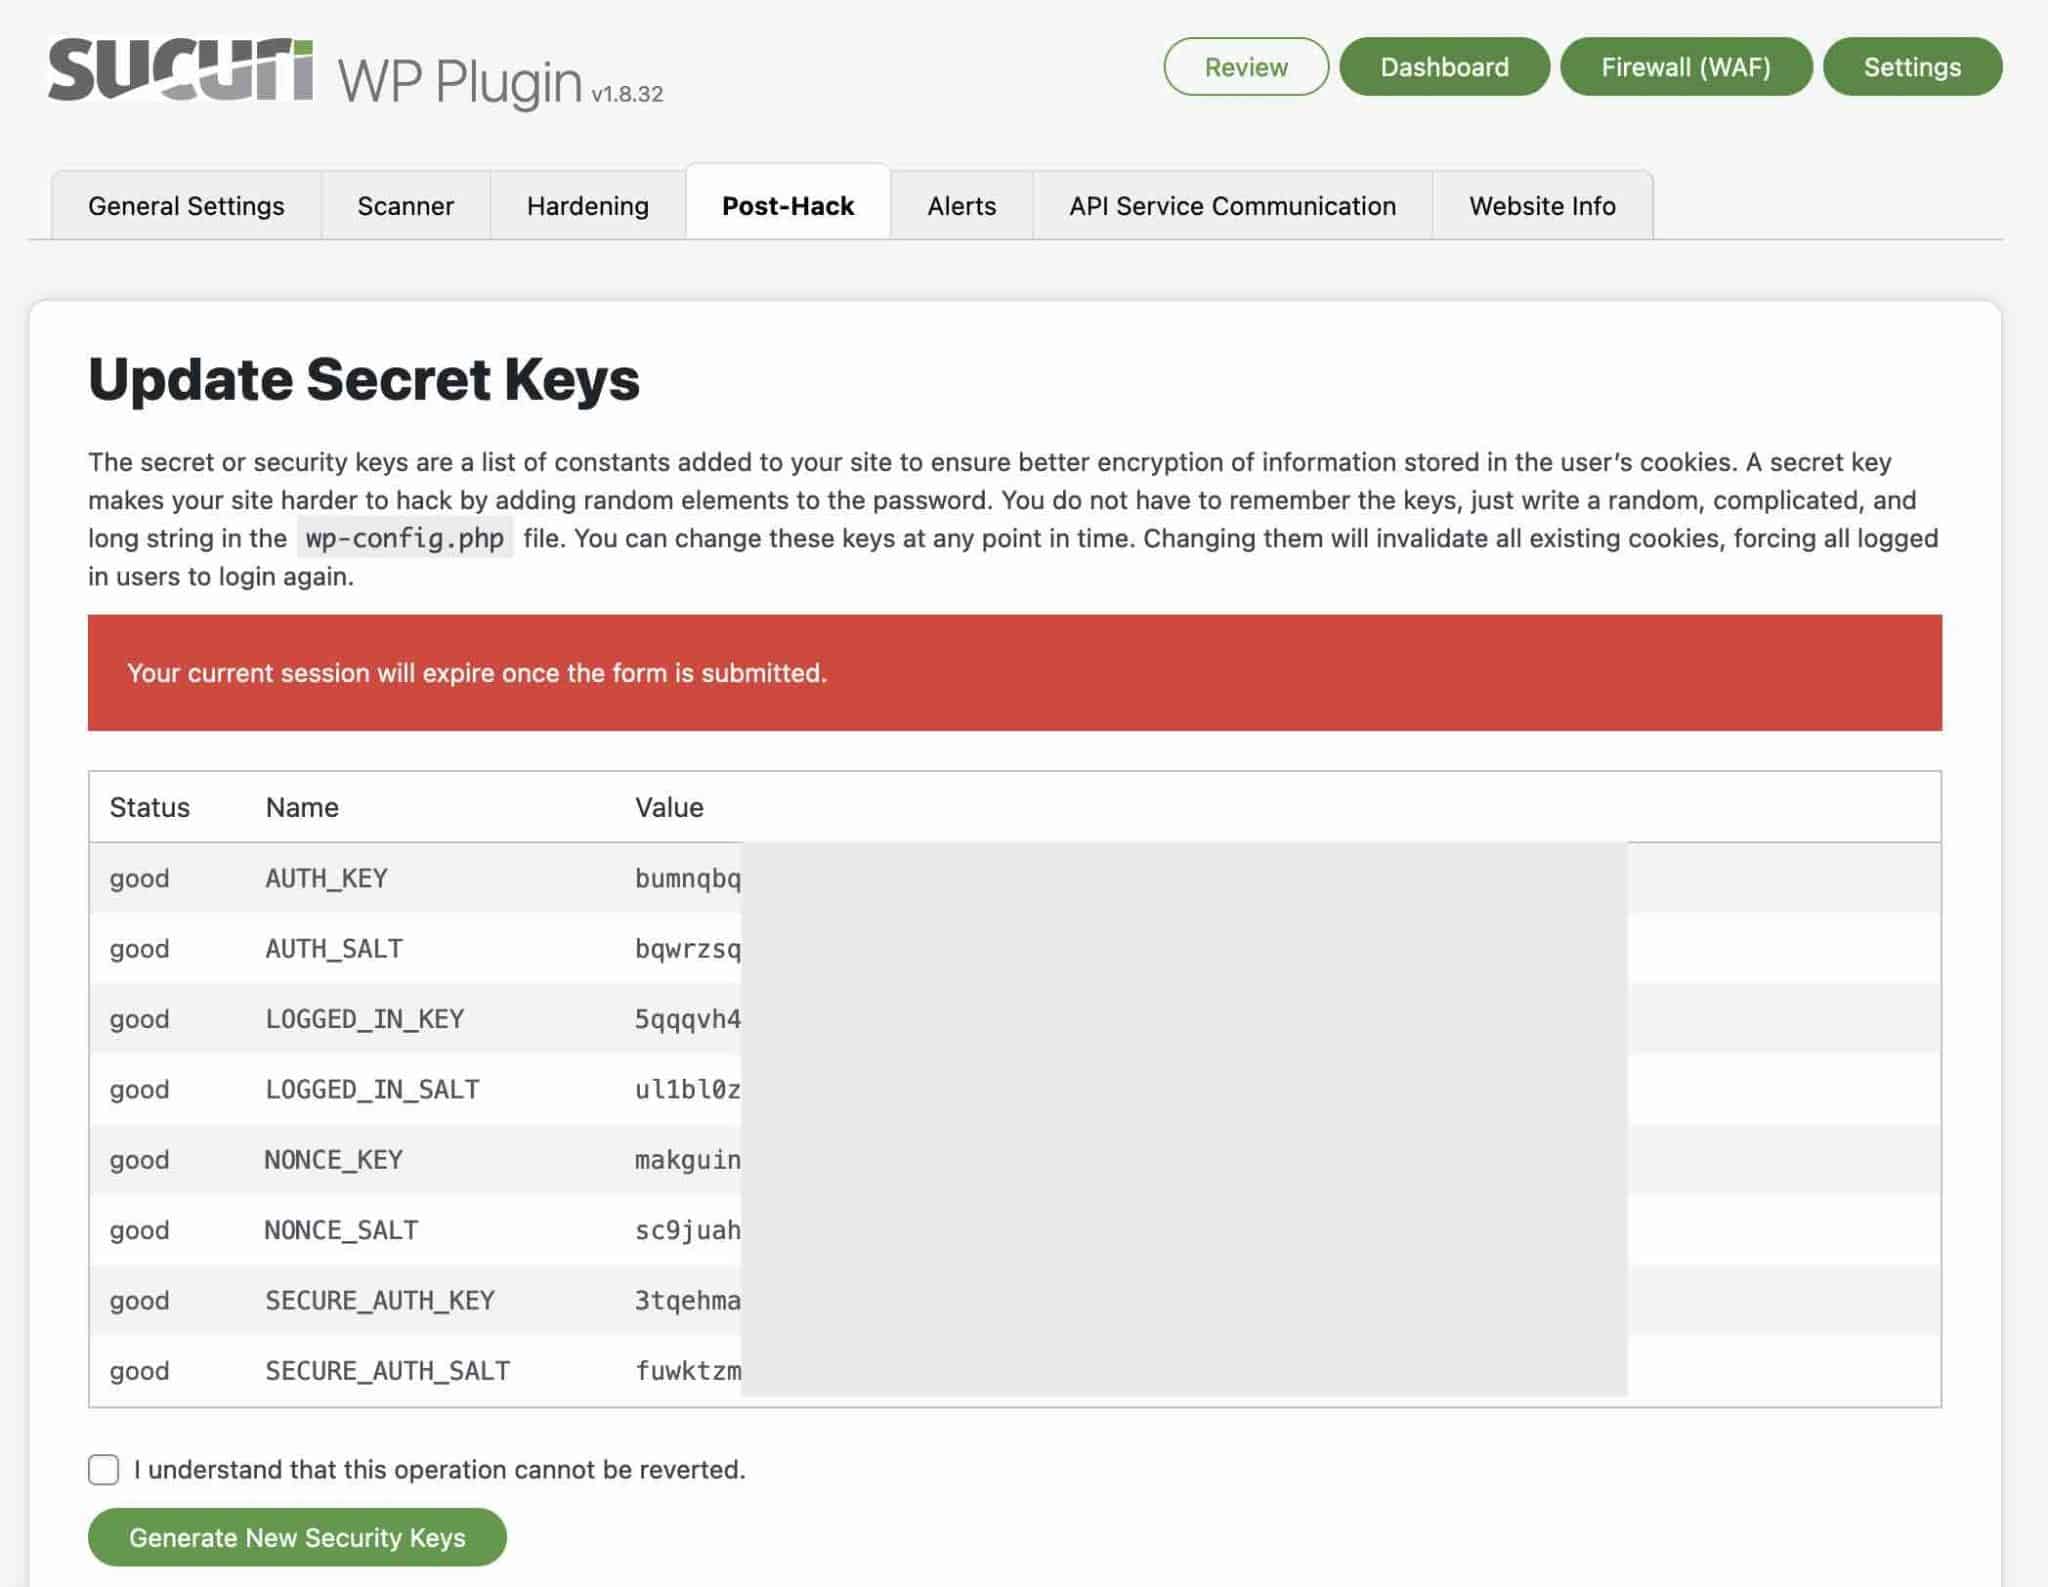 Sucuri allows you to update your secret keys.